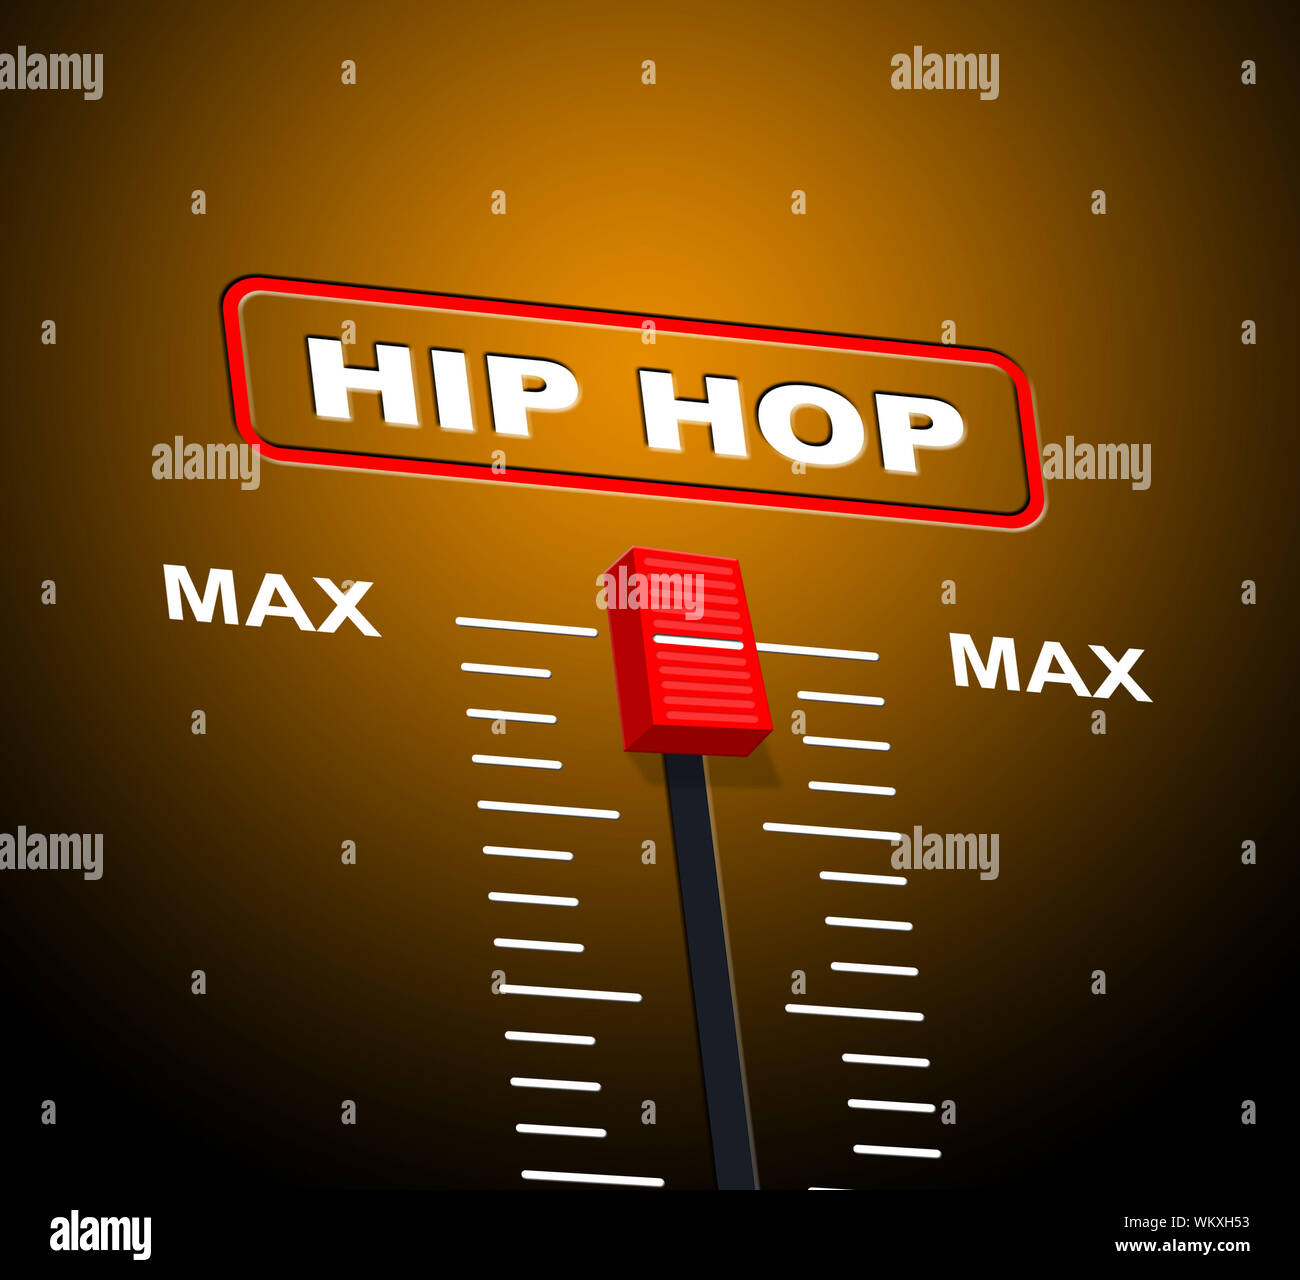 Hip Hop Music Meaning Sound Track And Equalisers Stock Photo